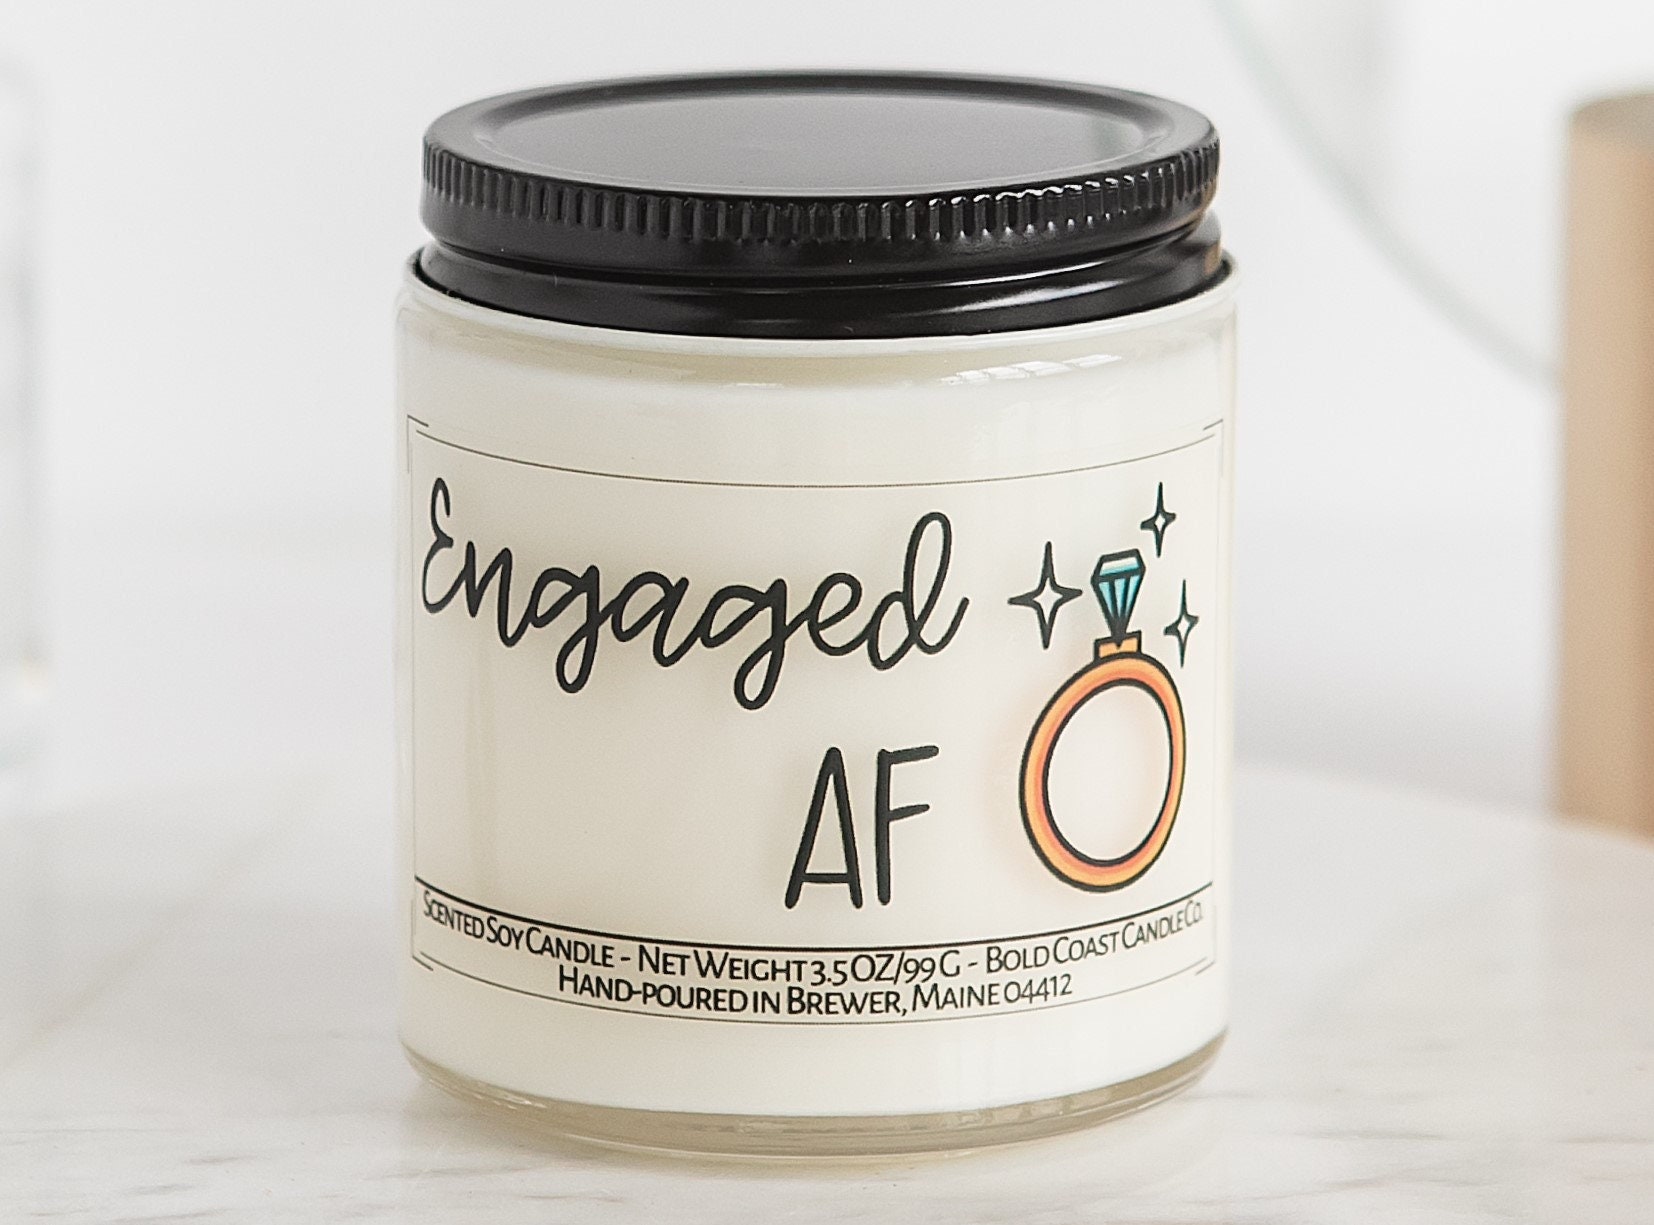 Engaged AF - Engagement Gifts for Women, Engaged Gifts for Her